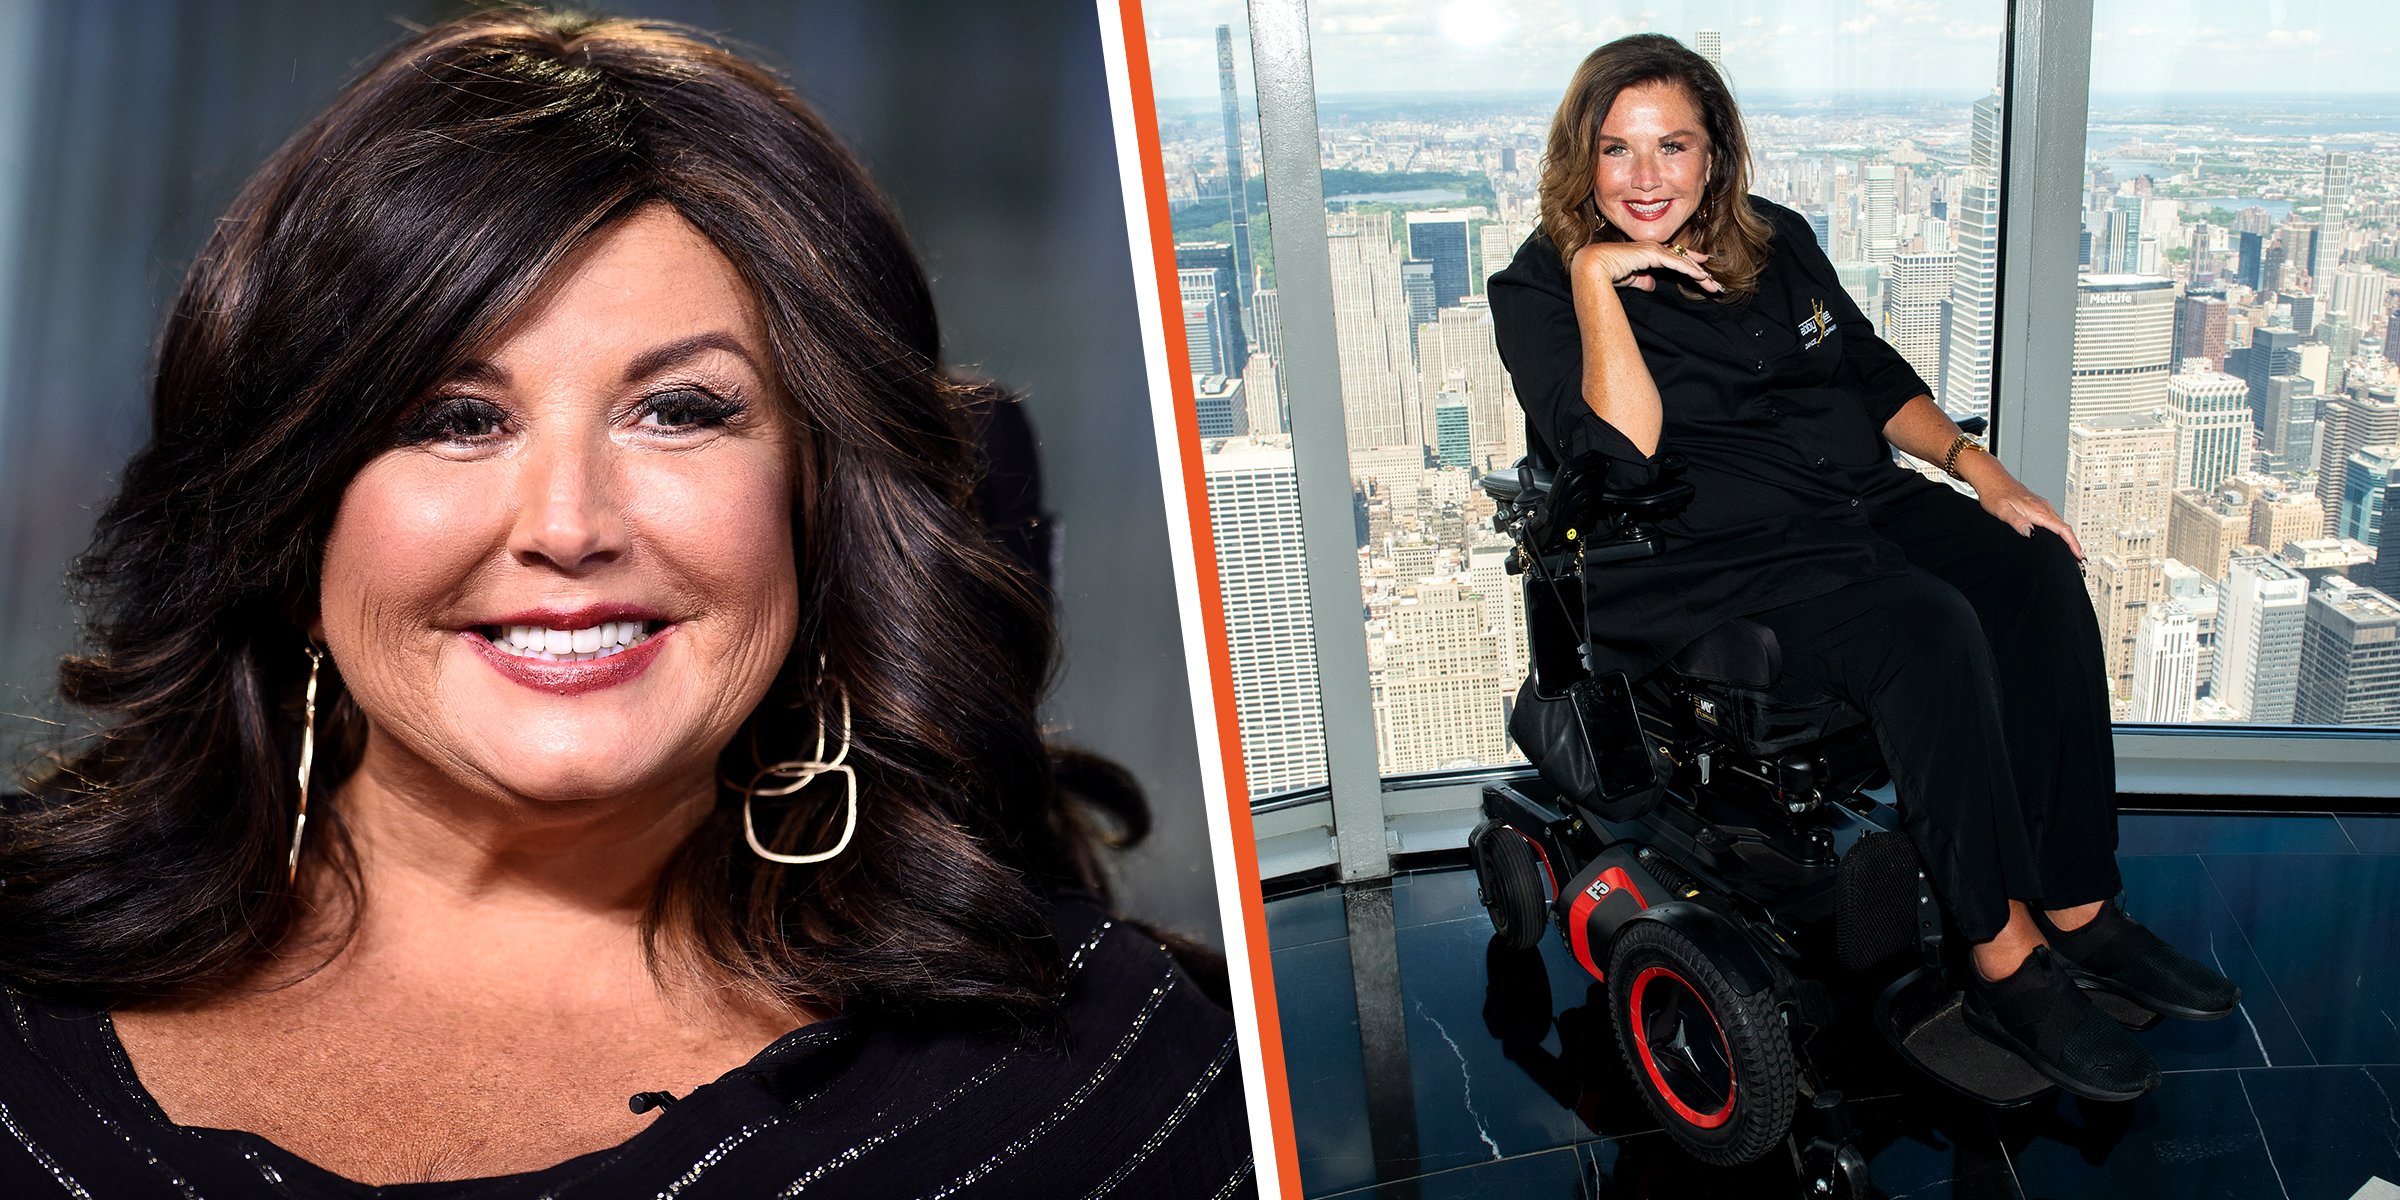 Why Is Abby Lee Miller Using a Wheelchair? Inside the Health Struggles ...